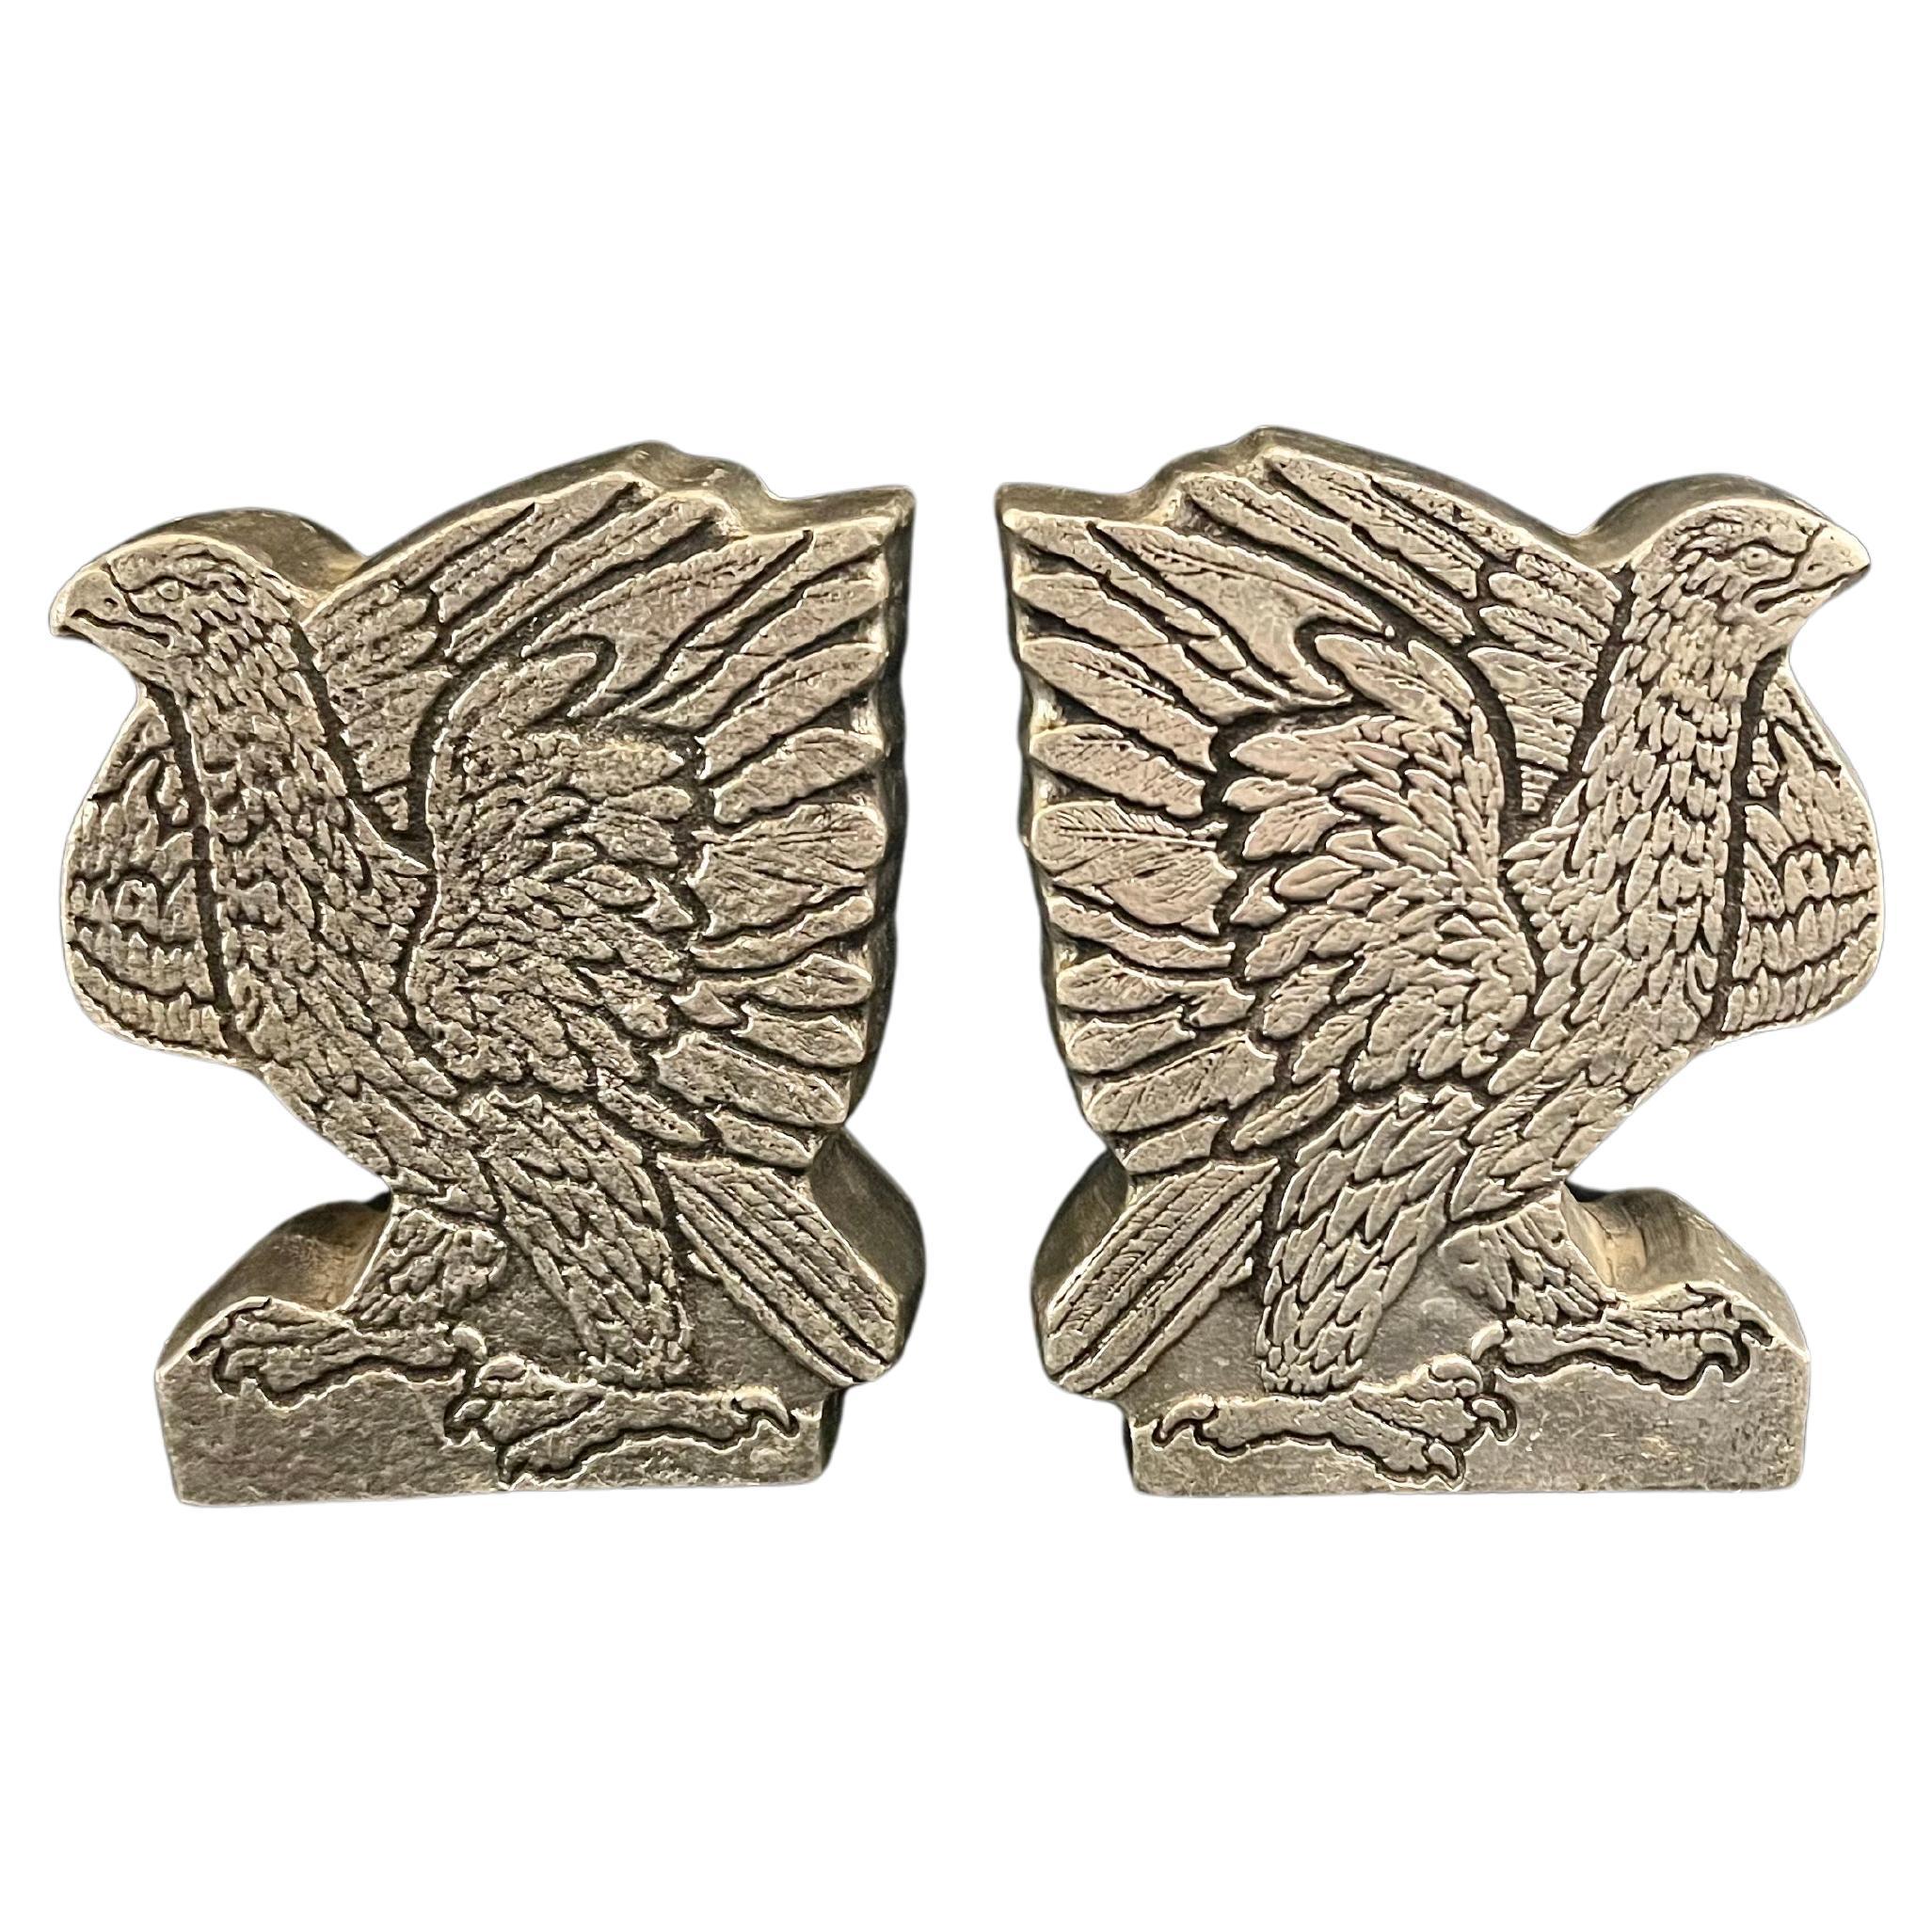 Beautiful solid cast pewter American Eagle cast bookends circa 1970's Wilton Columbia Pa.